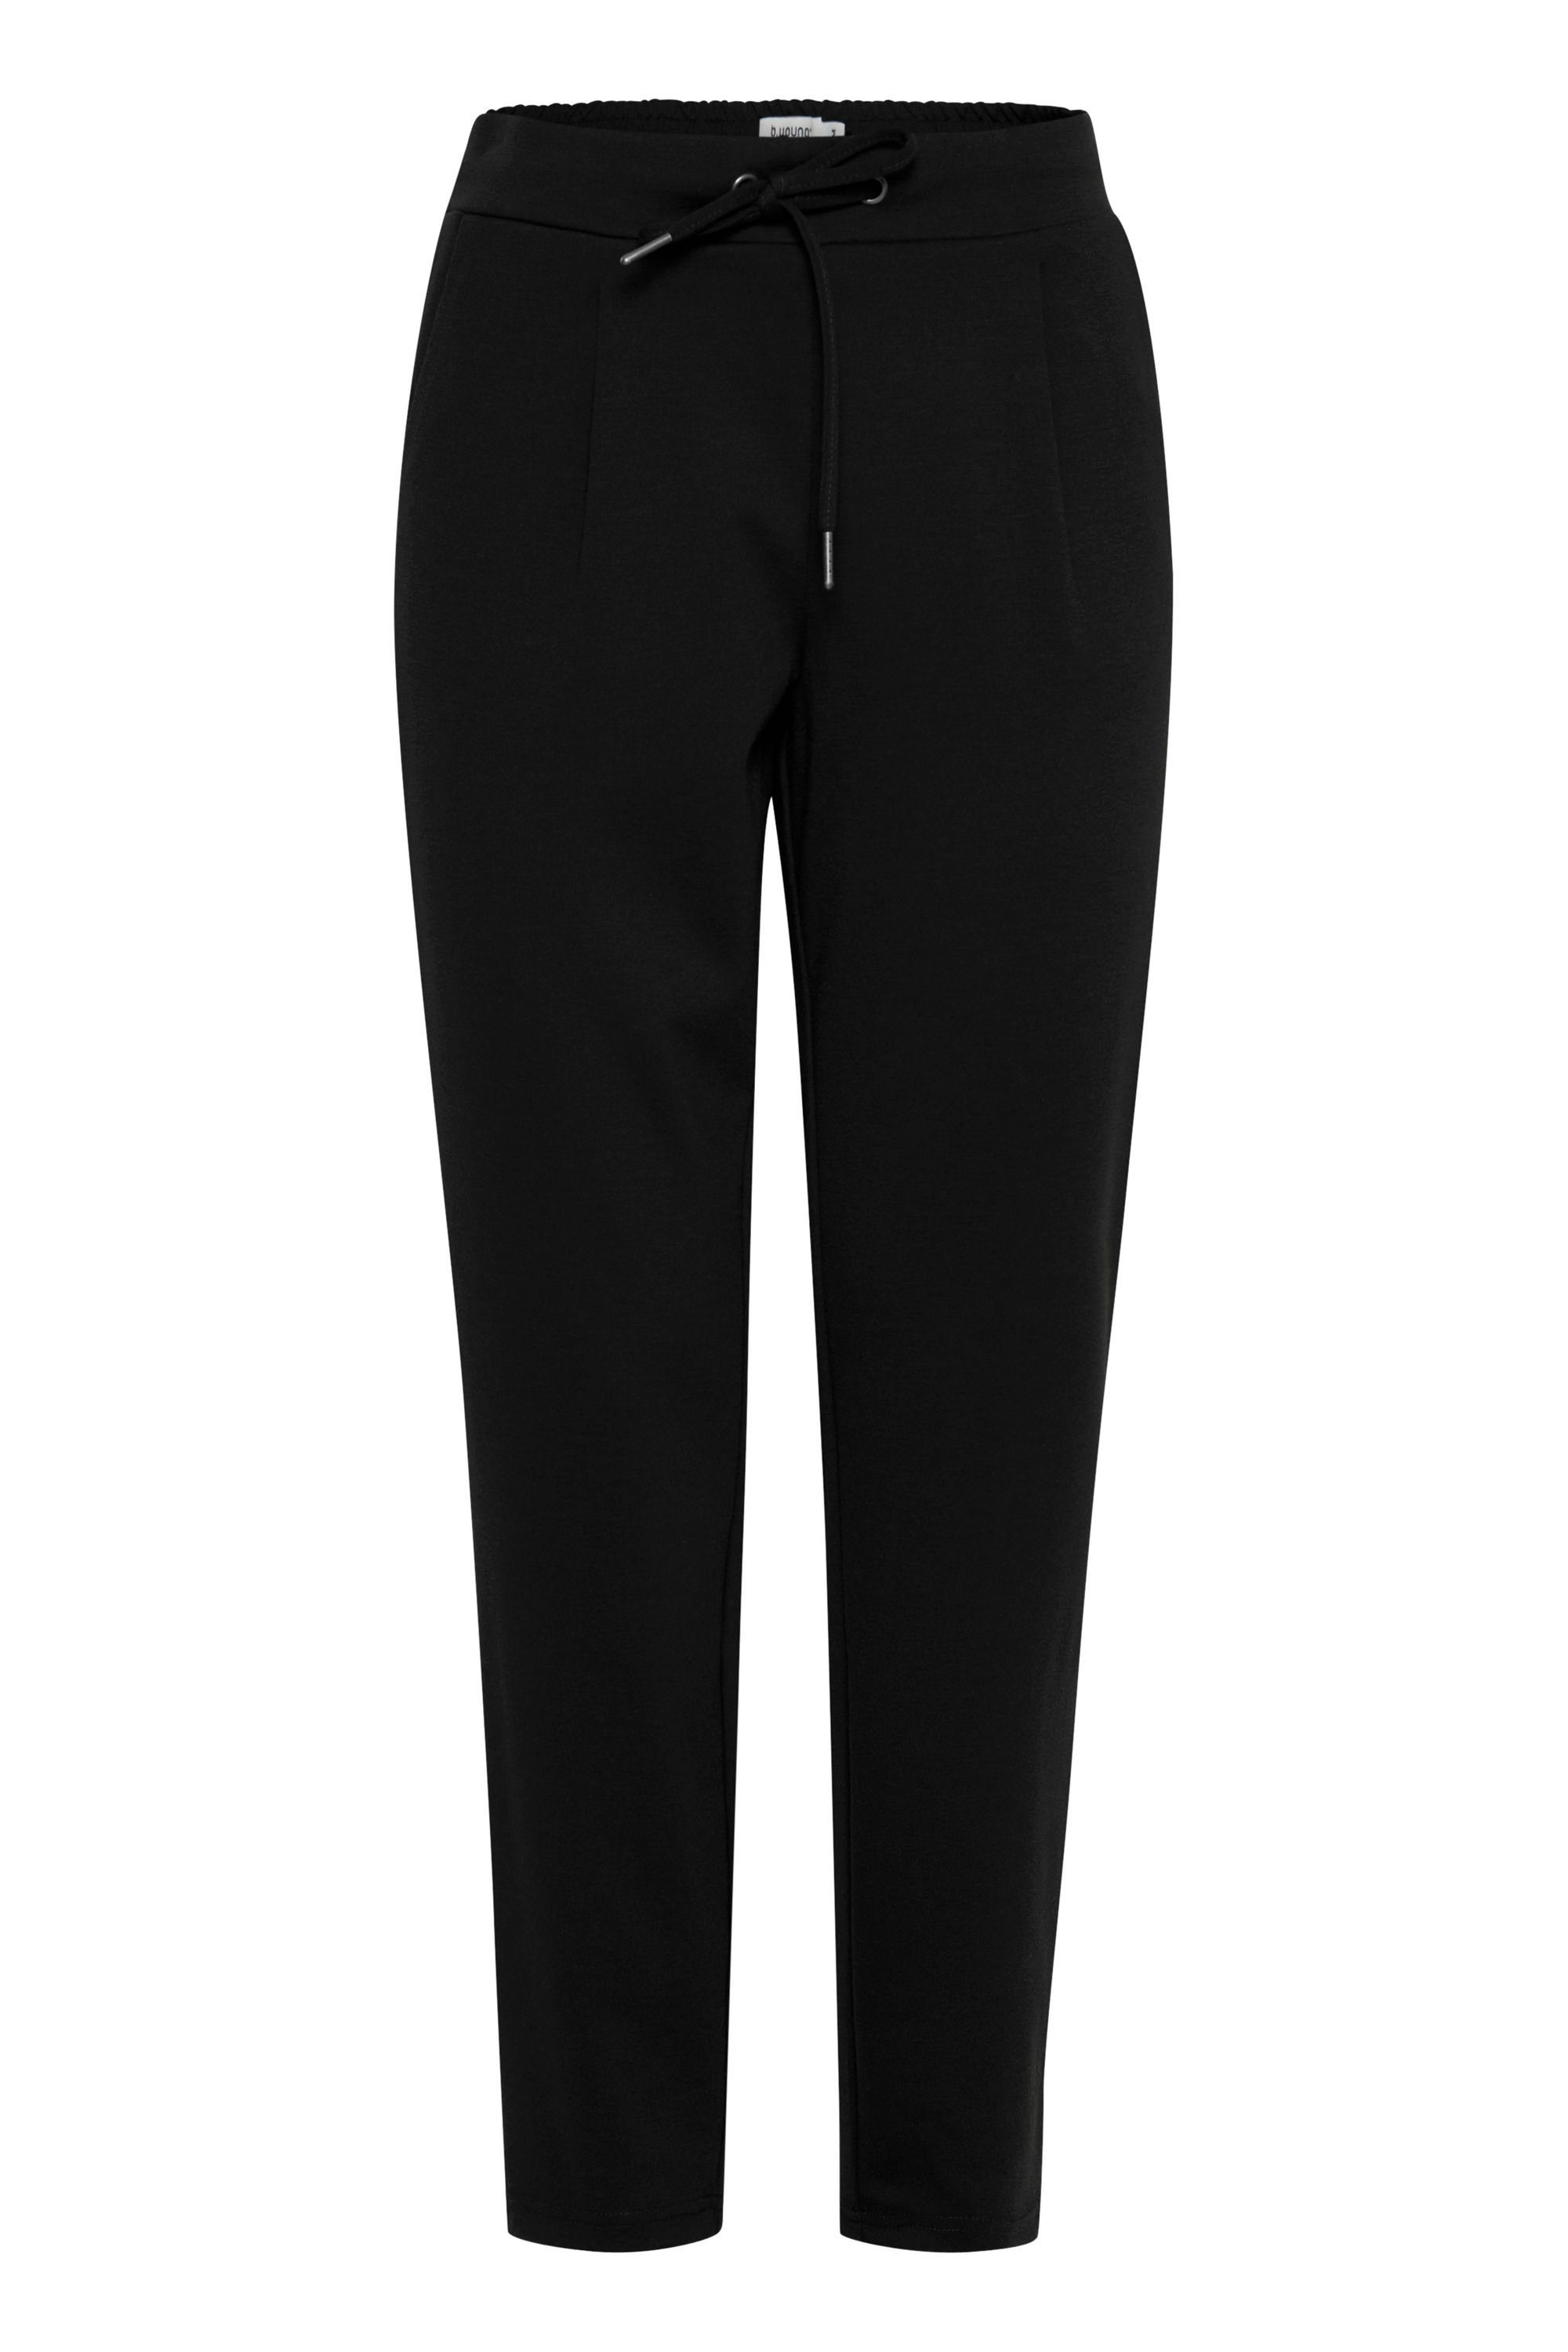 b.young Stoffhose BYRizetta crop pants - 20803903 Stoffhose mit bequemer Passform Black (80001)